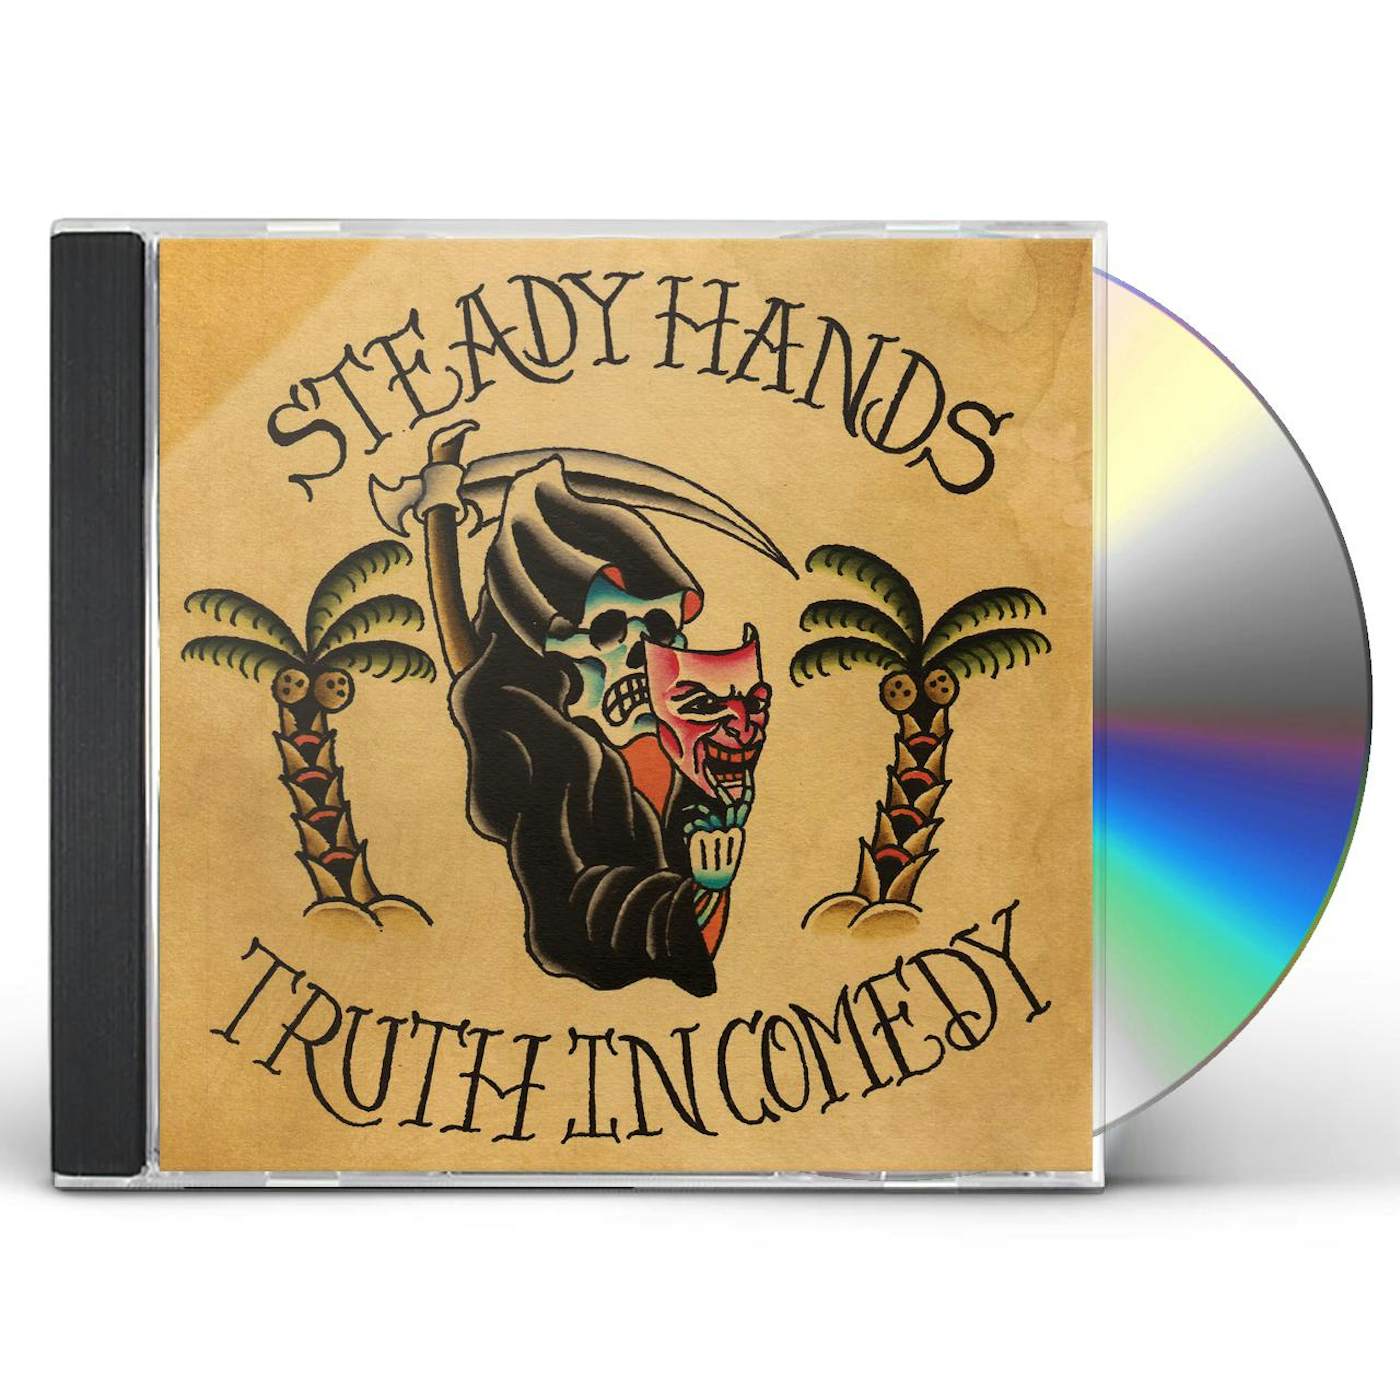 Steady Hands TRUTH IN COMEDY CD